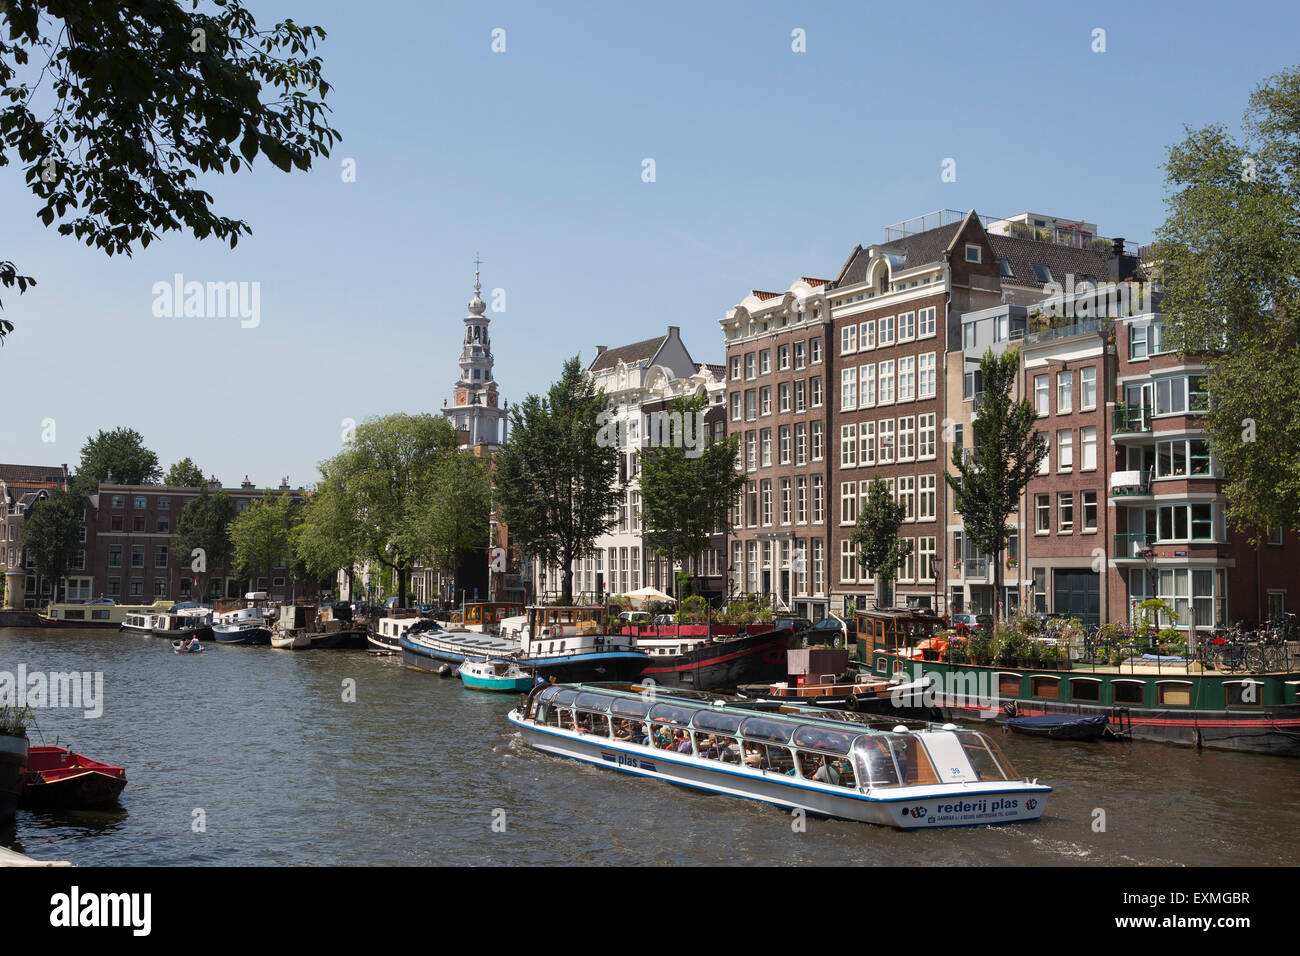 Boats and buildings on Oudeschans or Oude Schans canal or gracht in Amsterdam, North Holland, The Netherlands Stock Photo